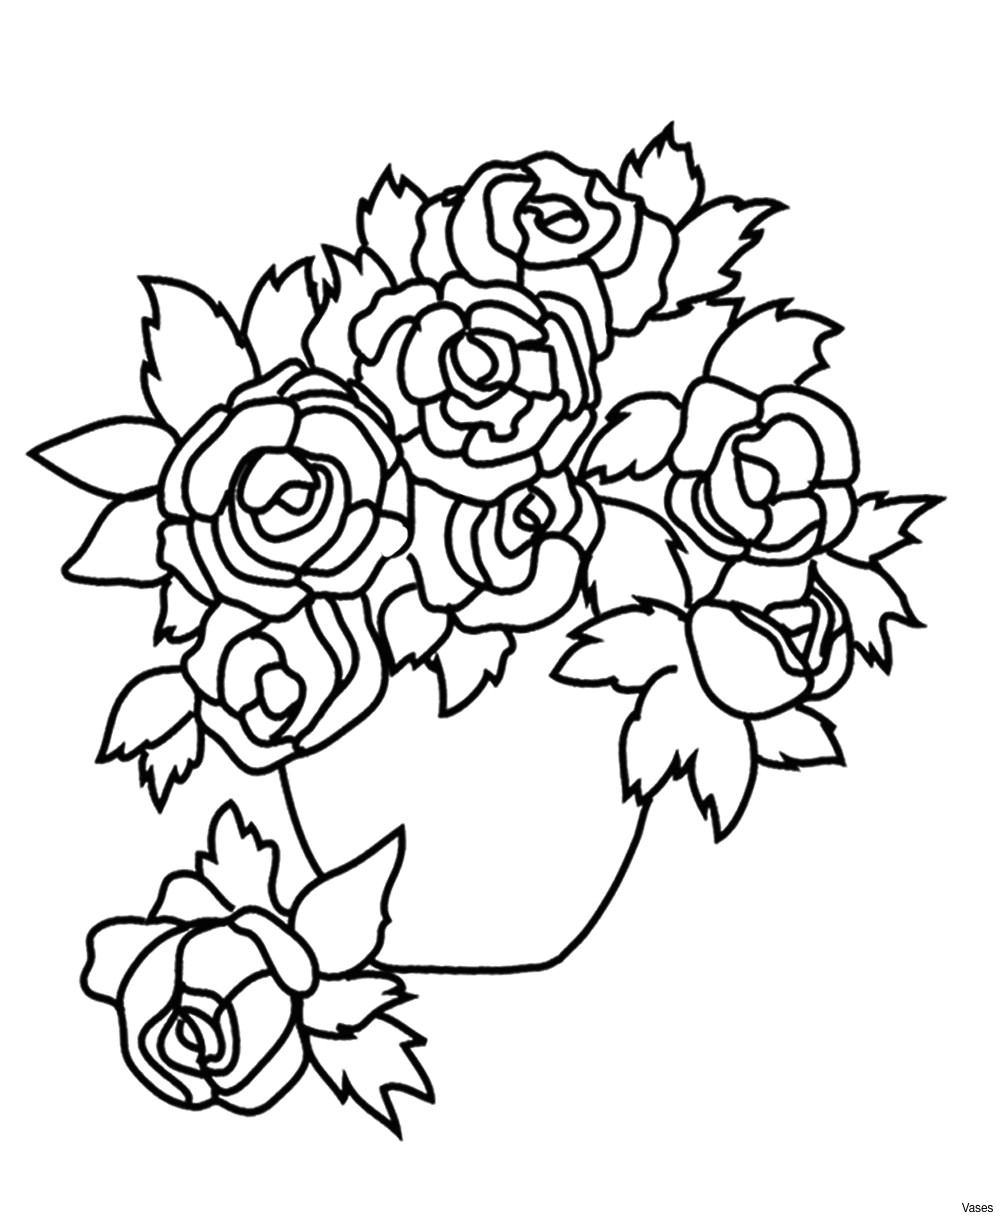 Line Drawing Flowers In Vase Flower Coloring Pages for Adults New Cool Vases Flower Vase Coloring